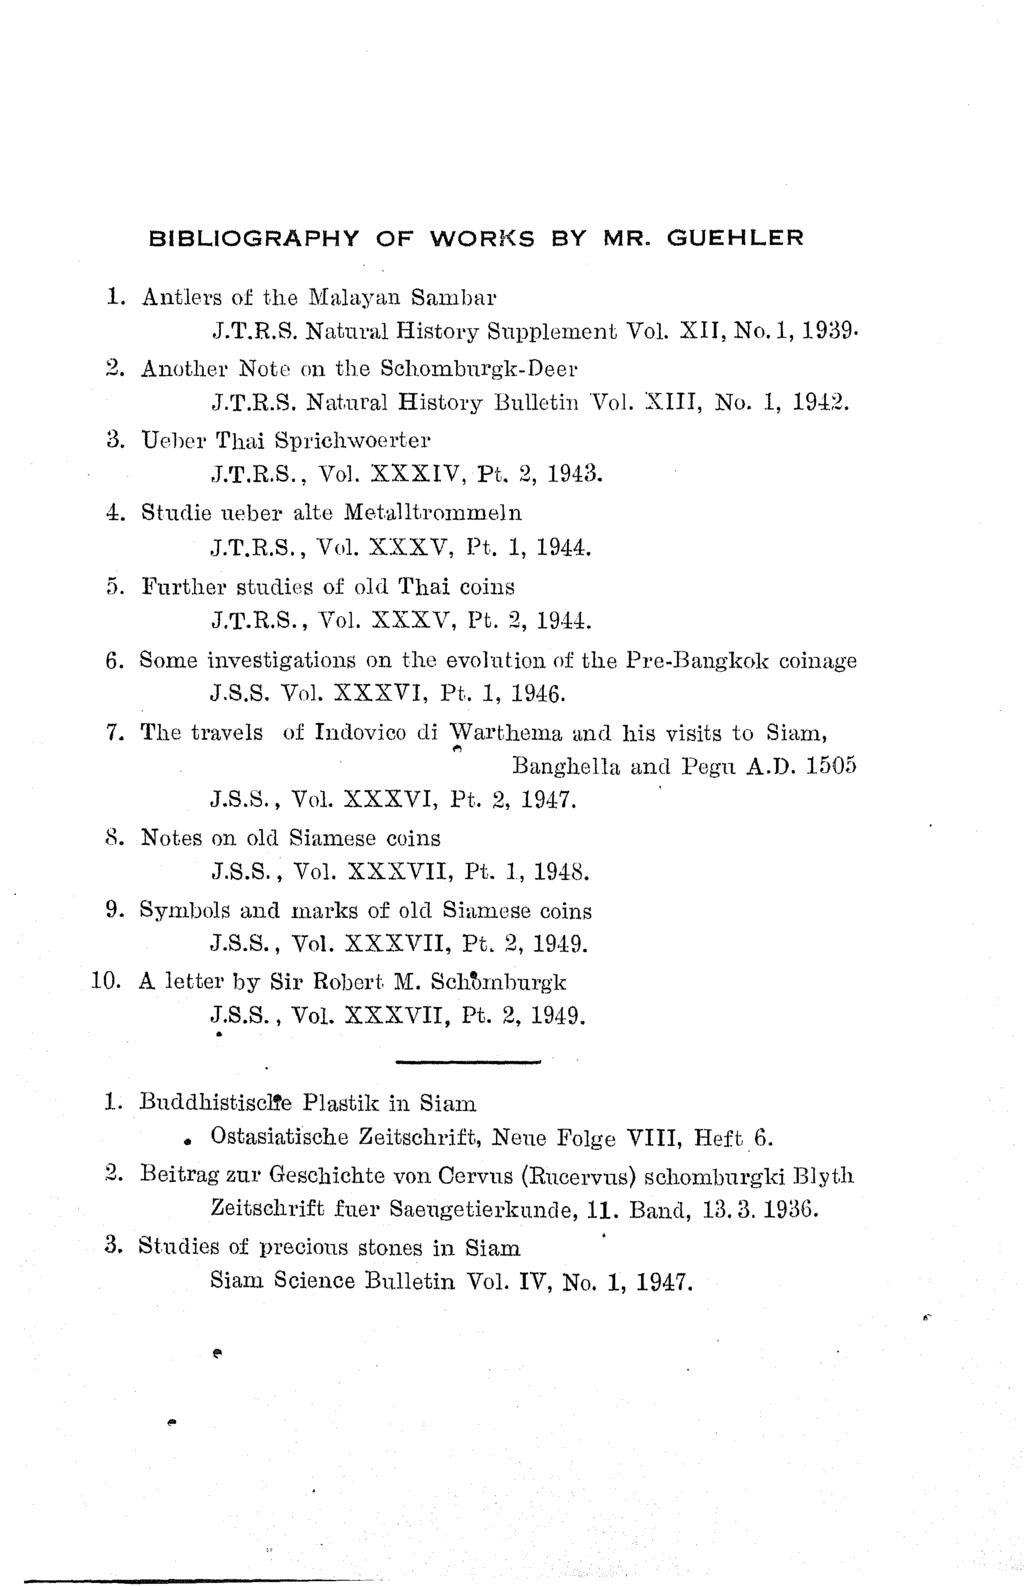 BIBLIOGRAPHY OF WORI<S BY MR. GUEHLER 1. Antlers of the Malayan Sa1nbar.J.T.R.S. Natural History Supplement Vol. XII, No.1, 1939 2. Another Note on the Schombnrgk-Deer J.T.R.S. Natural History Bulletin Vol.